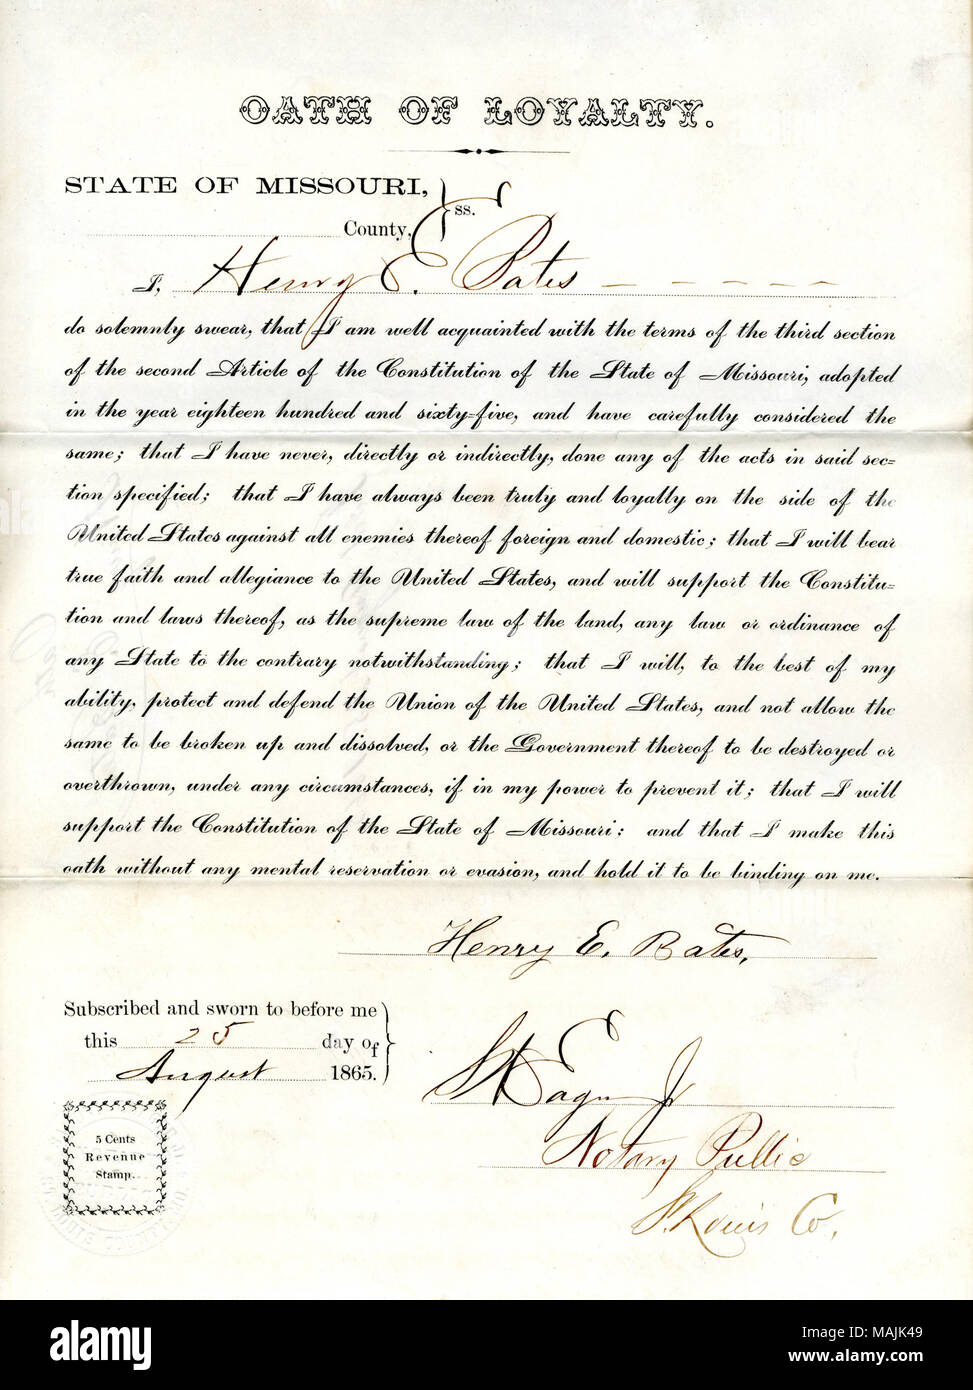 Swears oath of allegiance to the Government of the United States and the State of Missouri. Title: Loyalty oath of Henry E. Bates of Missouri, County of St. Louis  . 25 August 1865. Bates, H. Stock Photo